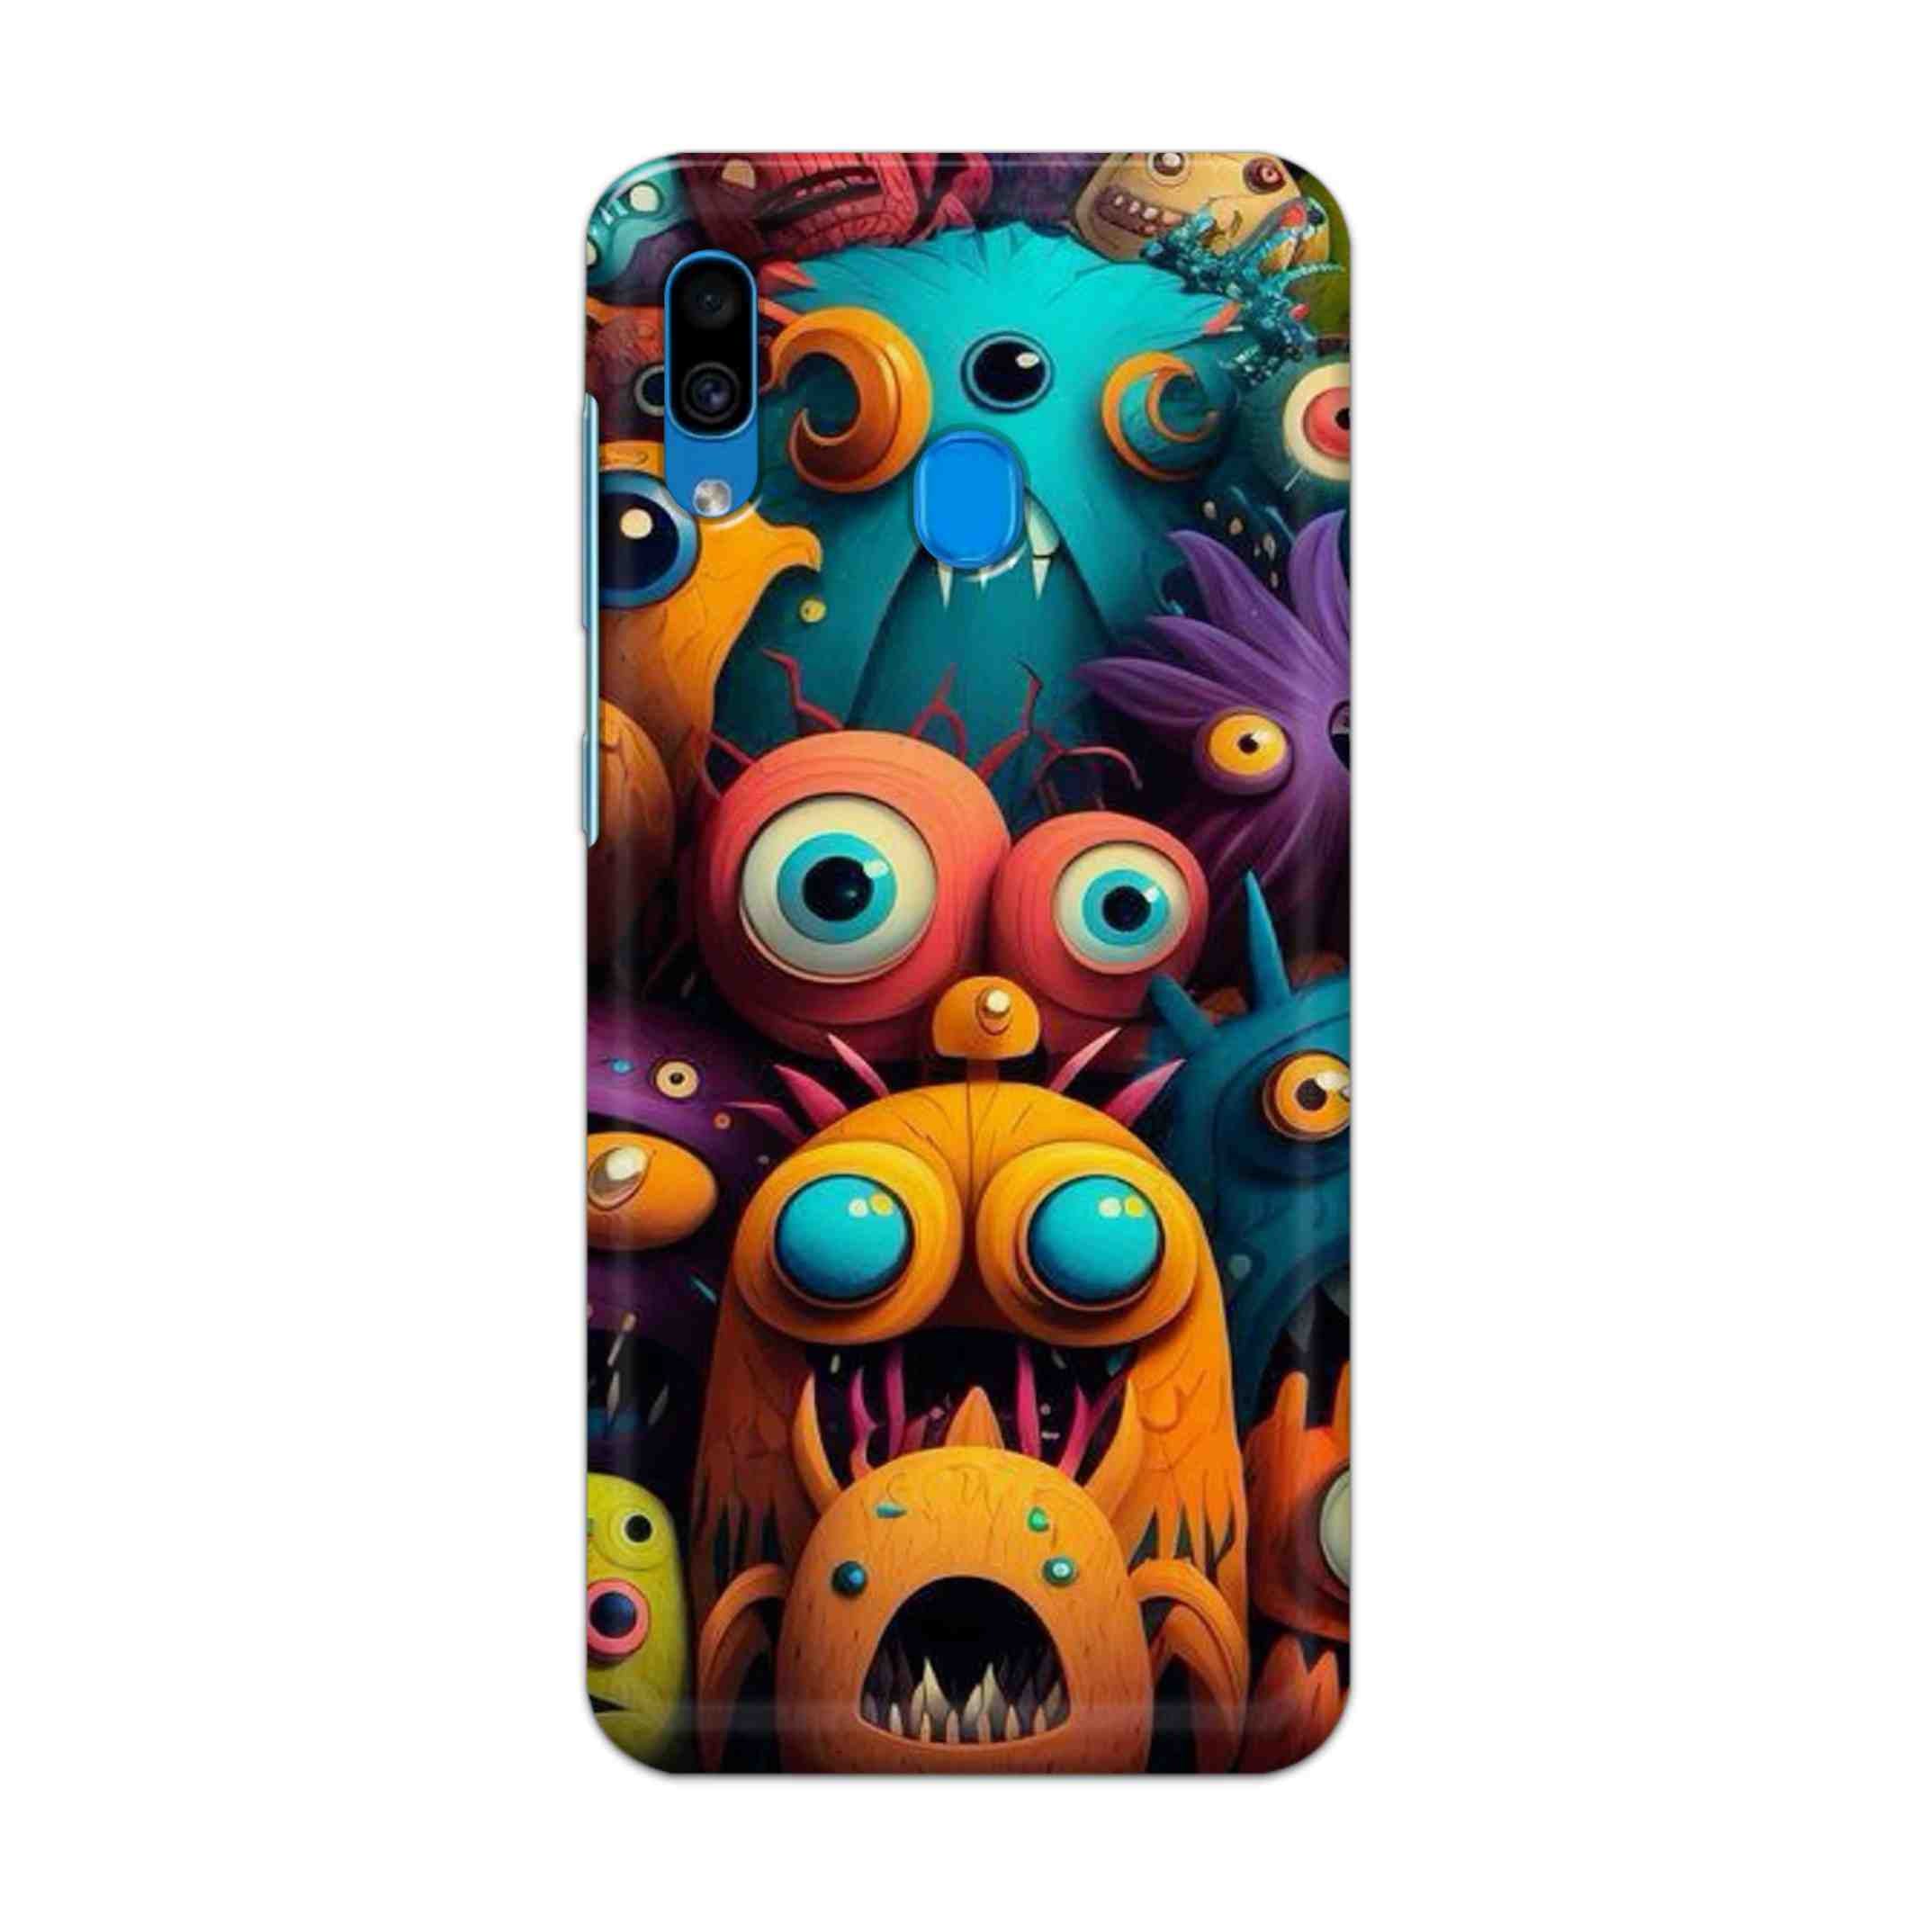 Buy Zombie Hard Back Mobile Phone Case Cover For Samsung Galaxy A30 Online